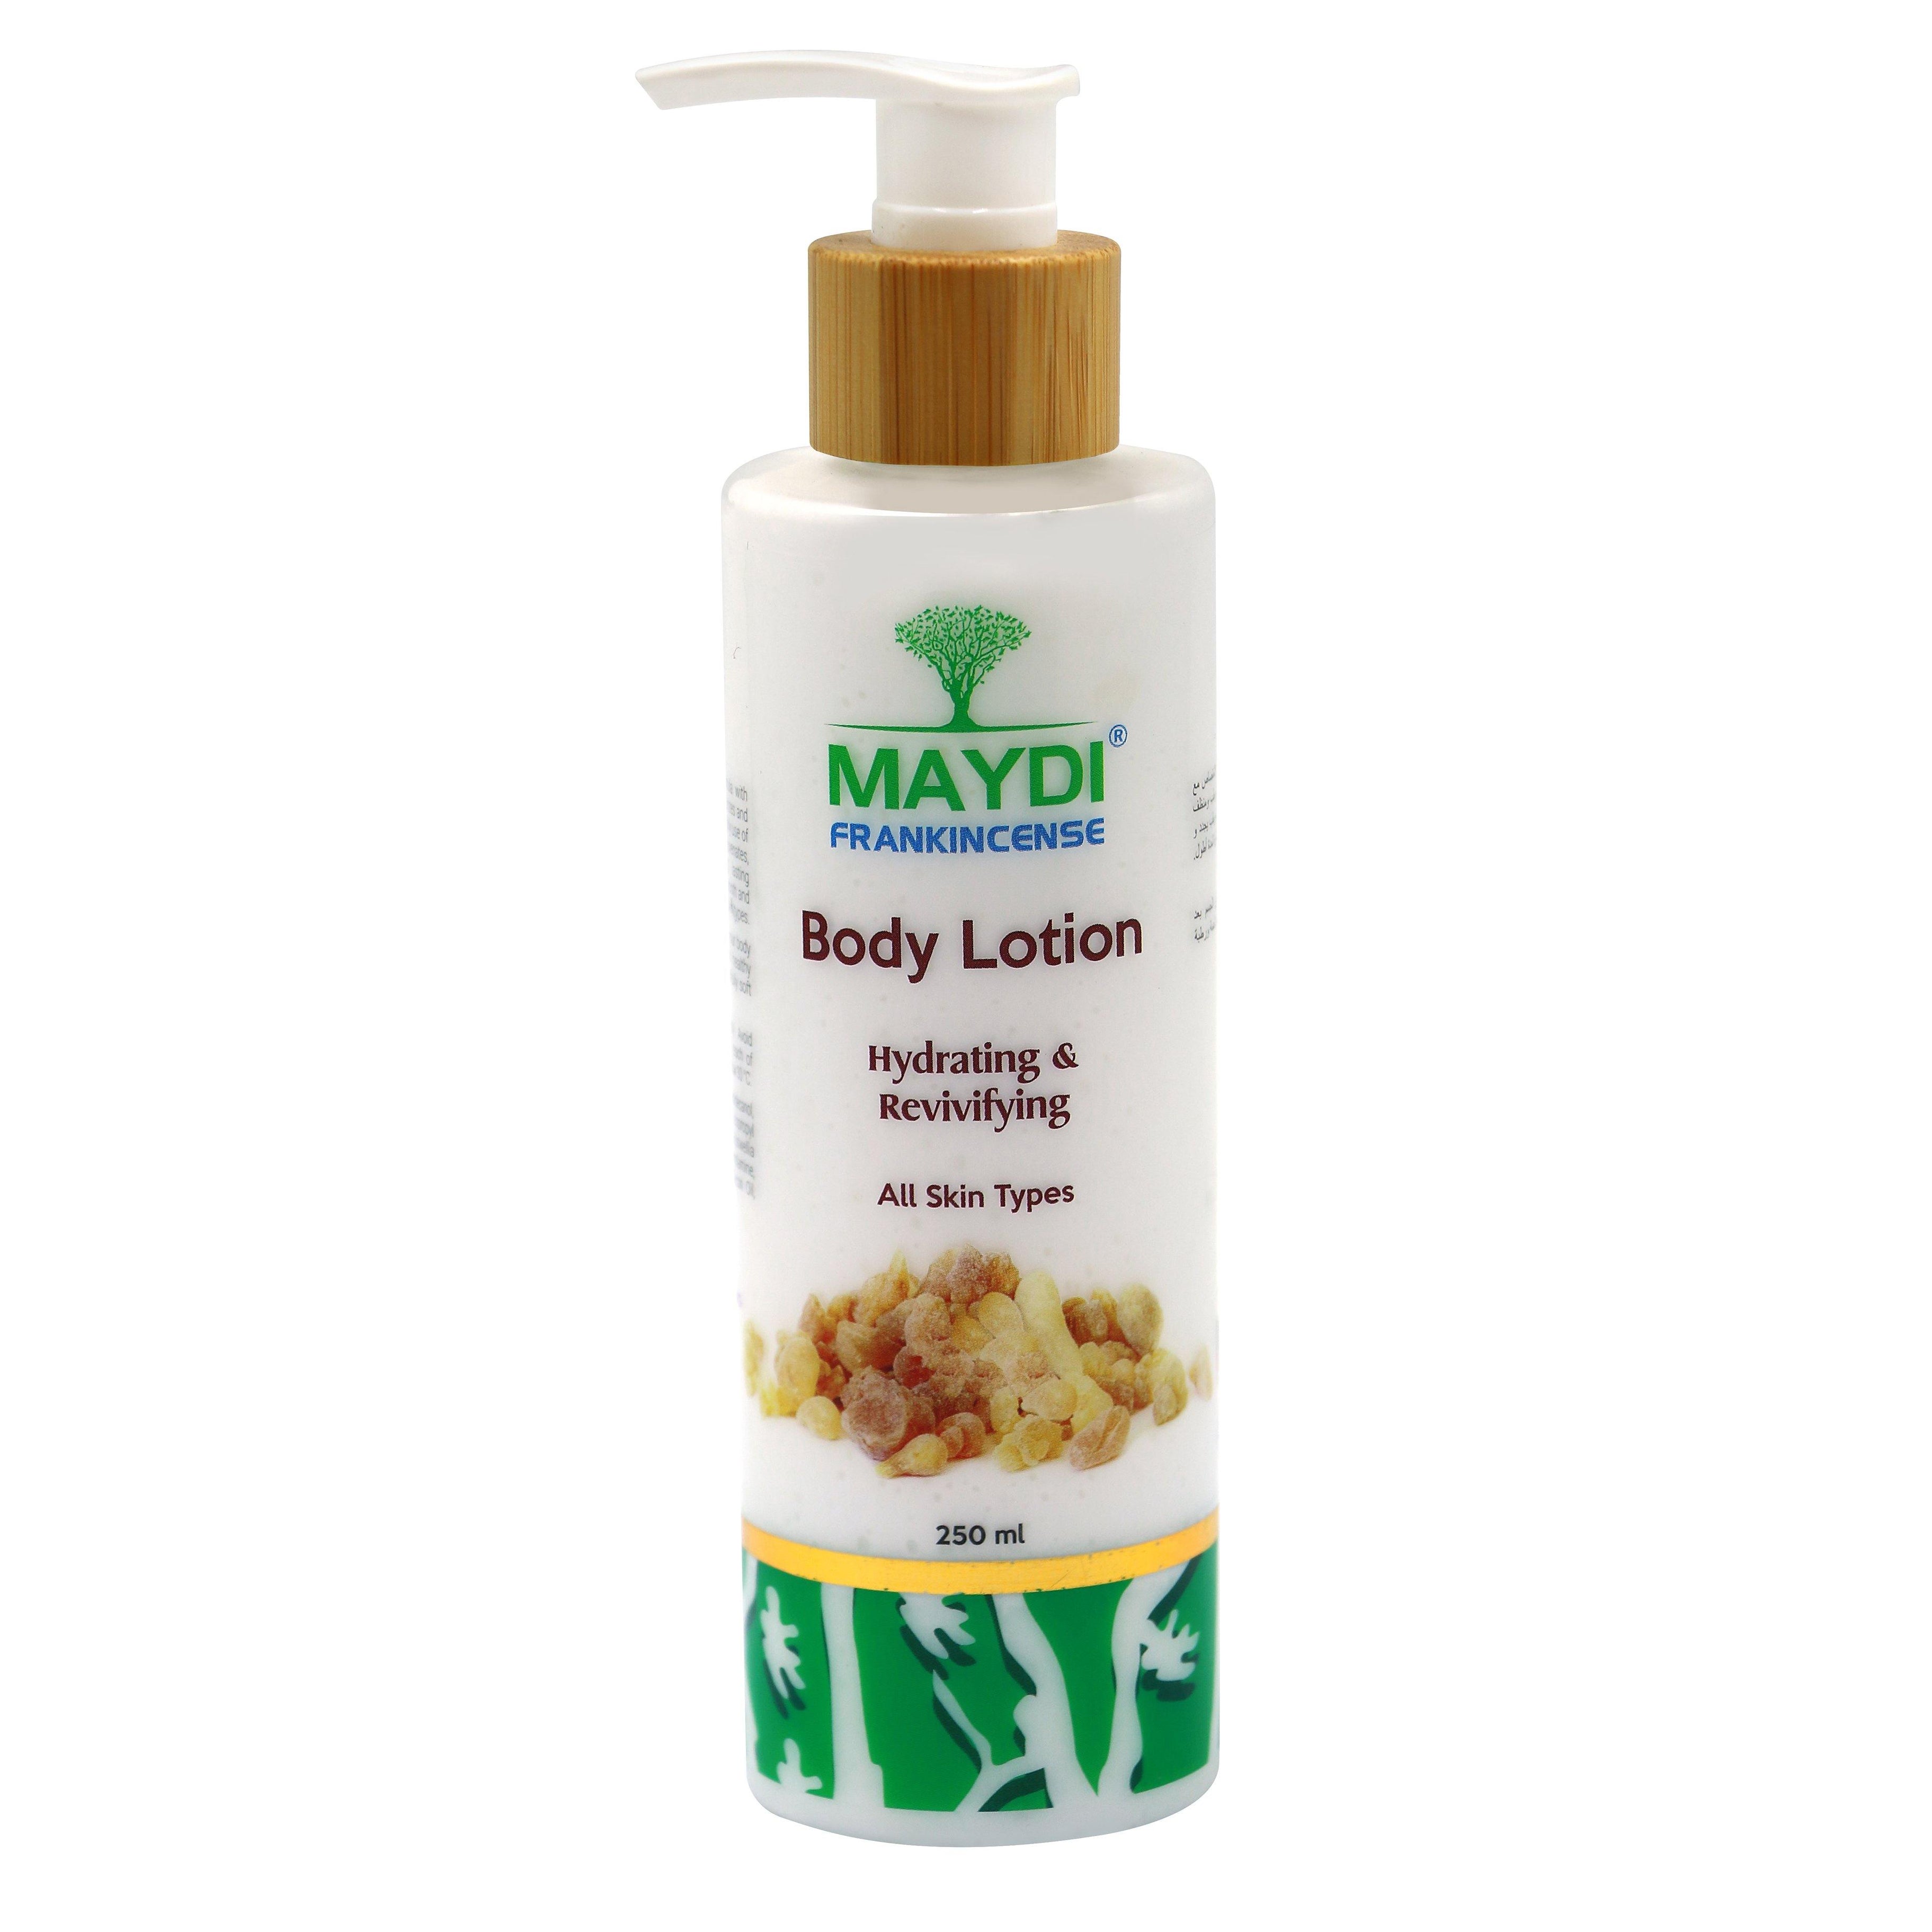 Maydi Frankincense Body Lotion, 250ml - Med7 Online